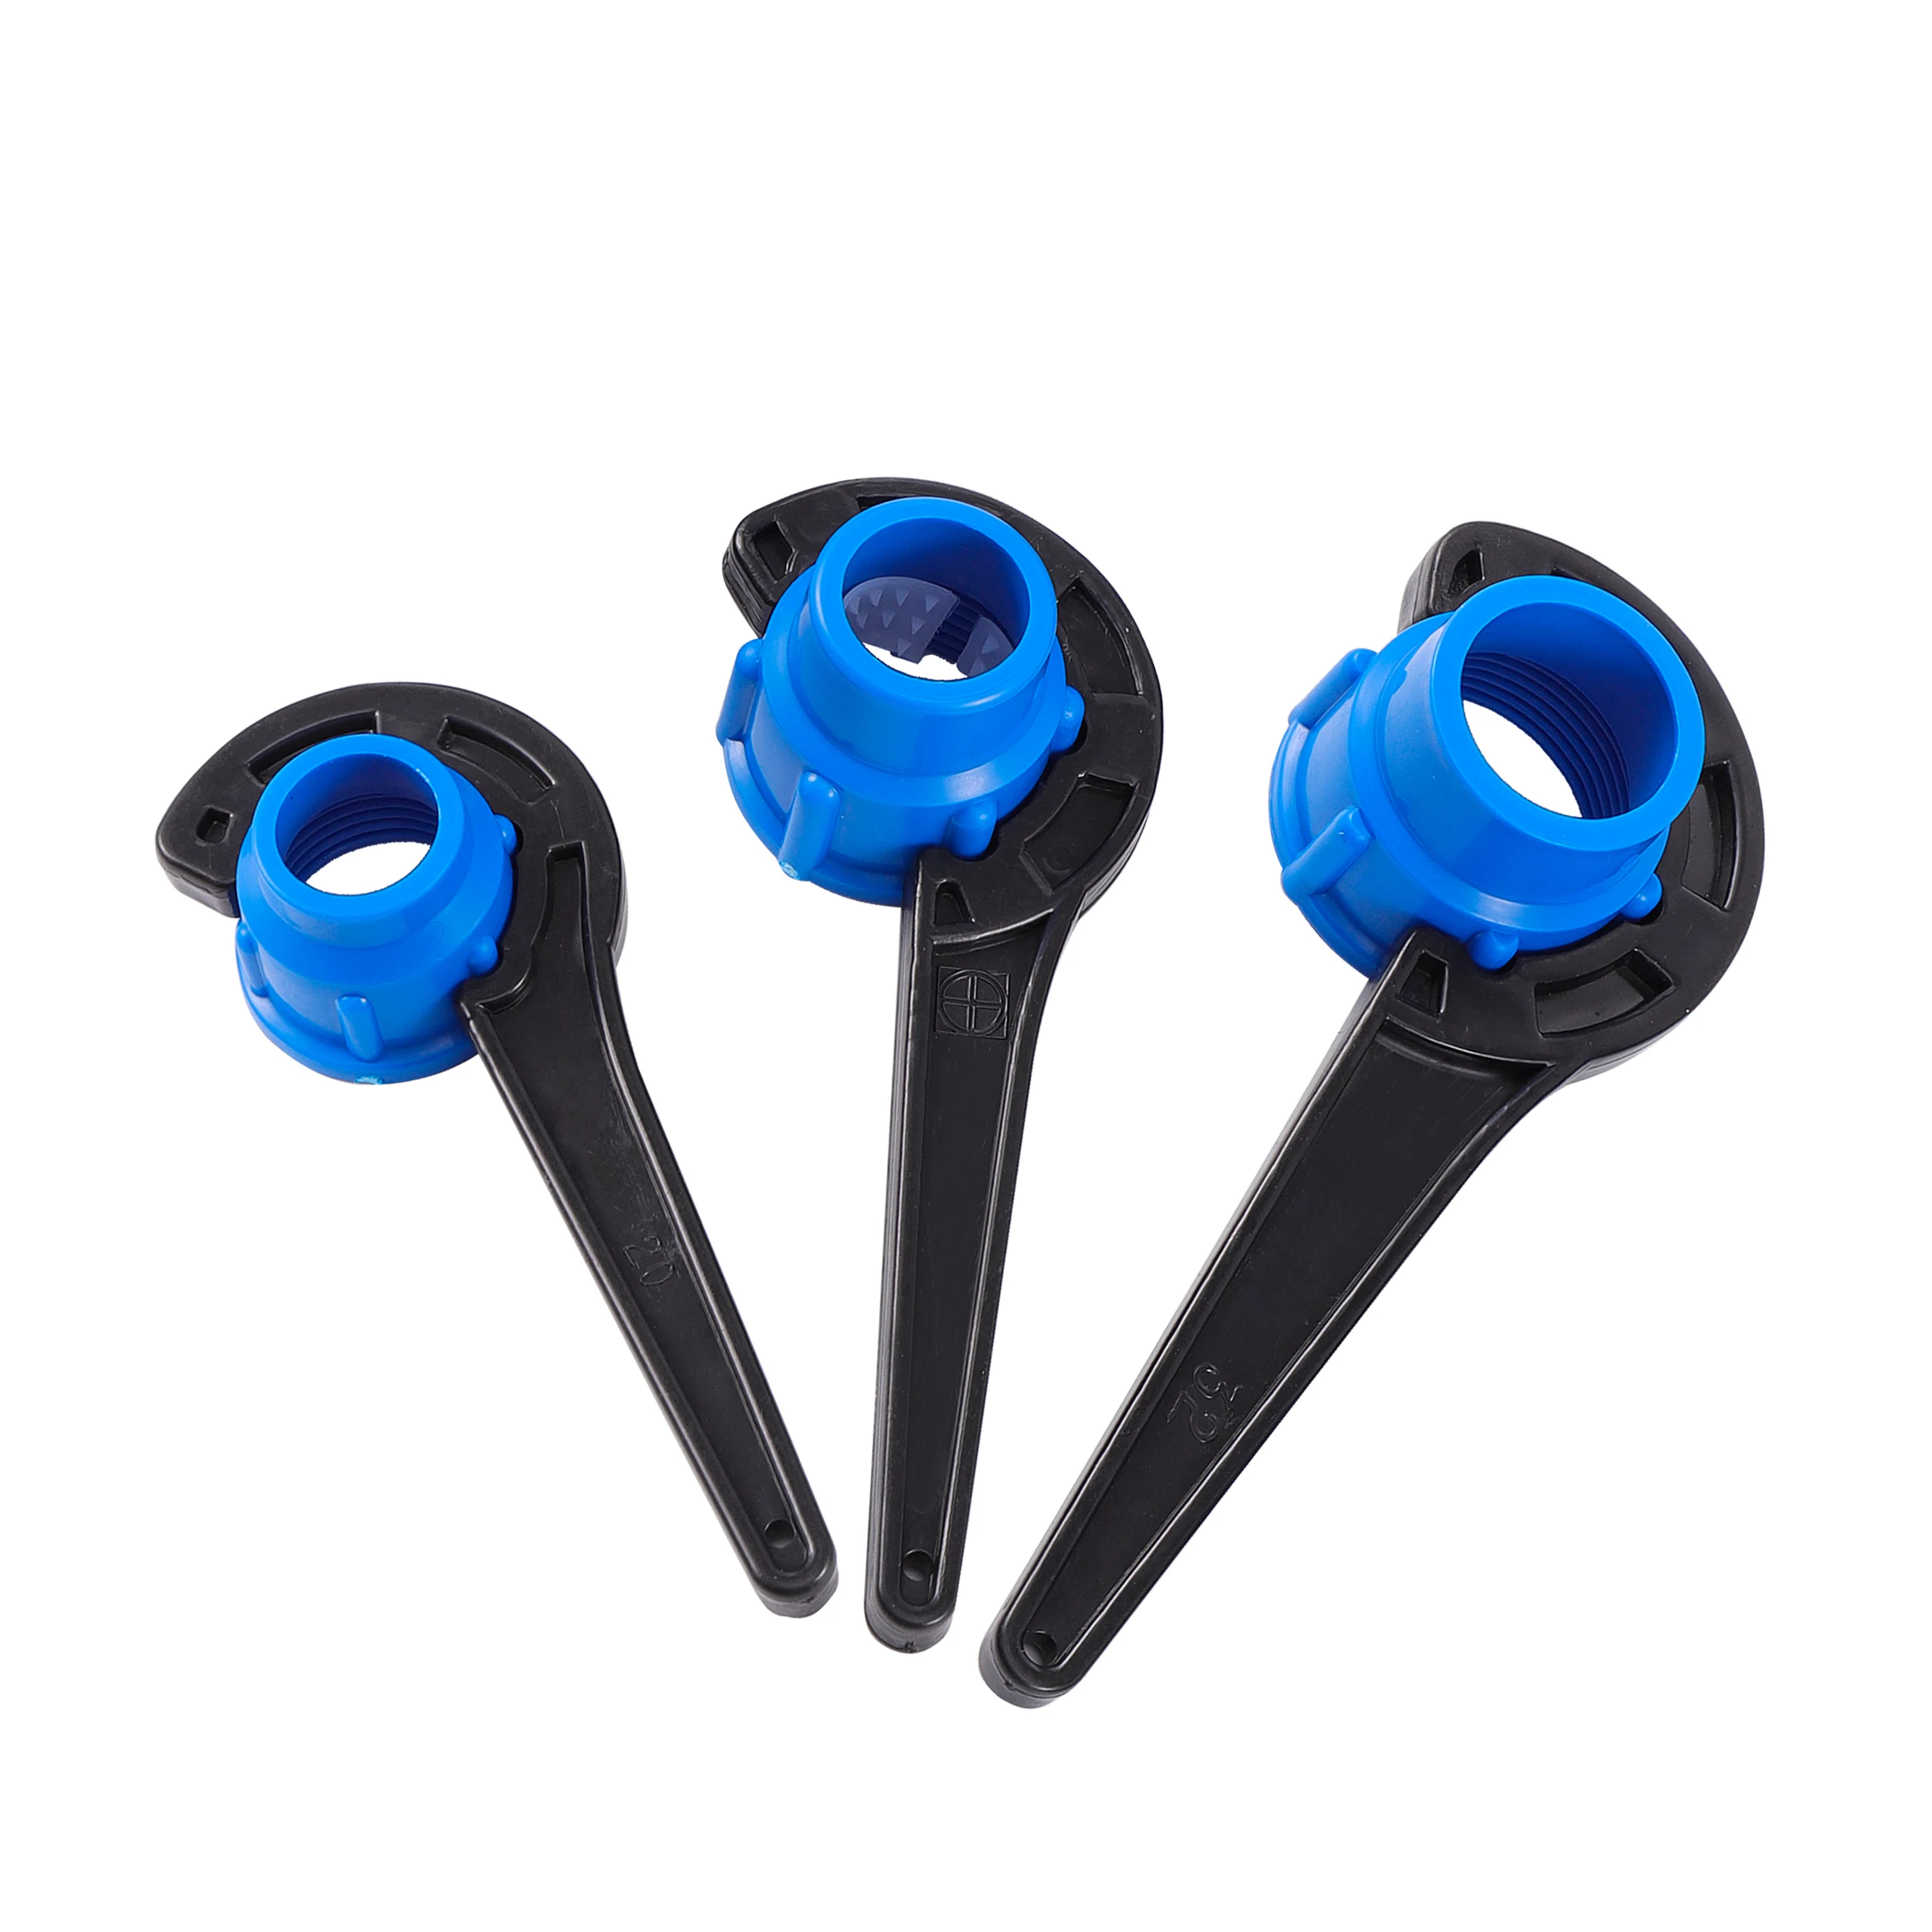 20/25/32/40/50mm PE Pipe Fast Connecting Fittings Wrench PE PVC Tube Valve Lock Nut Special Wrench Irrigation Tubing Repair Tool